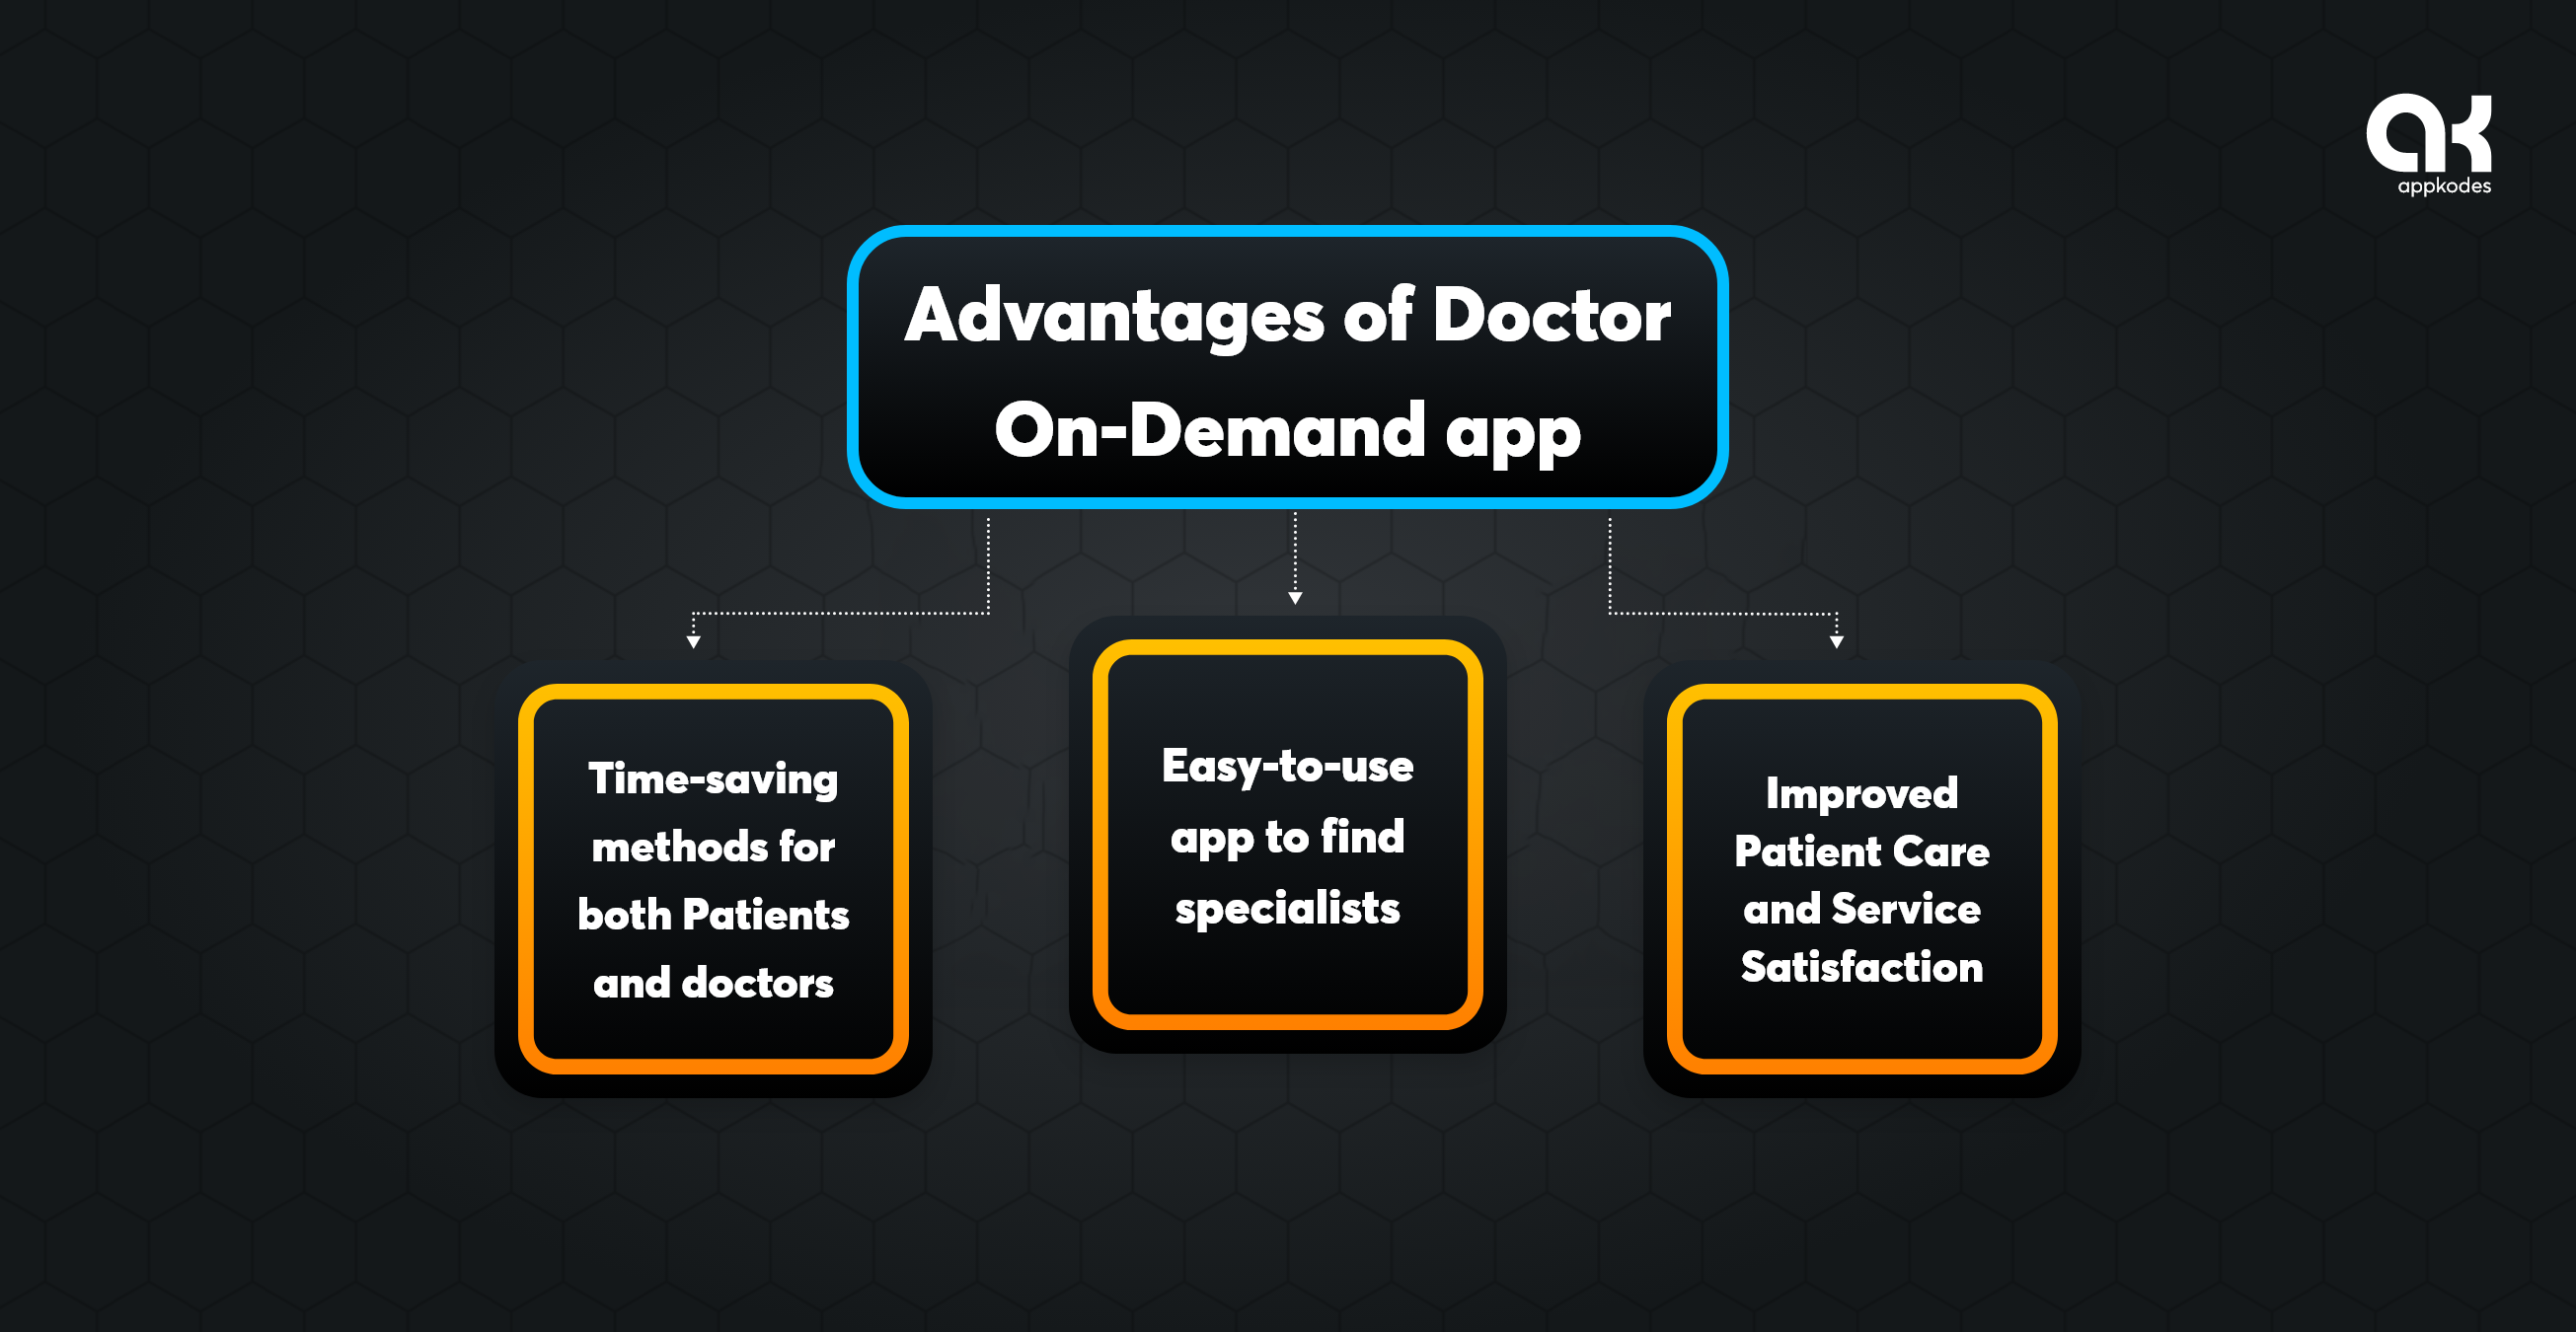 Advantages of Doctor On-Demand app